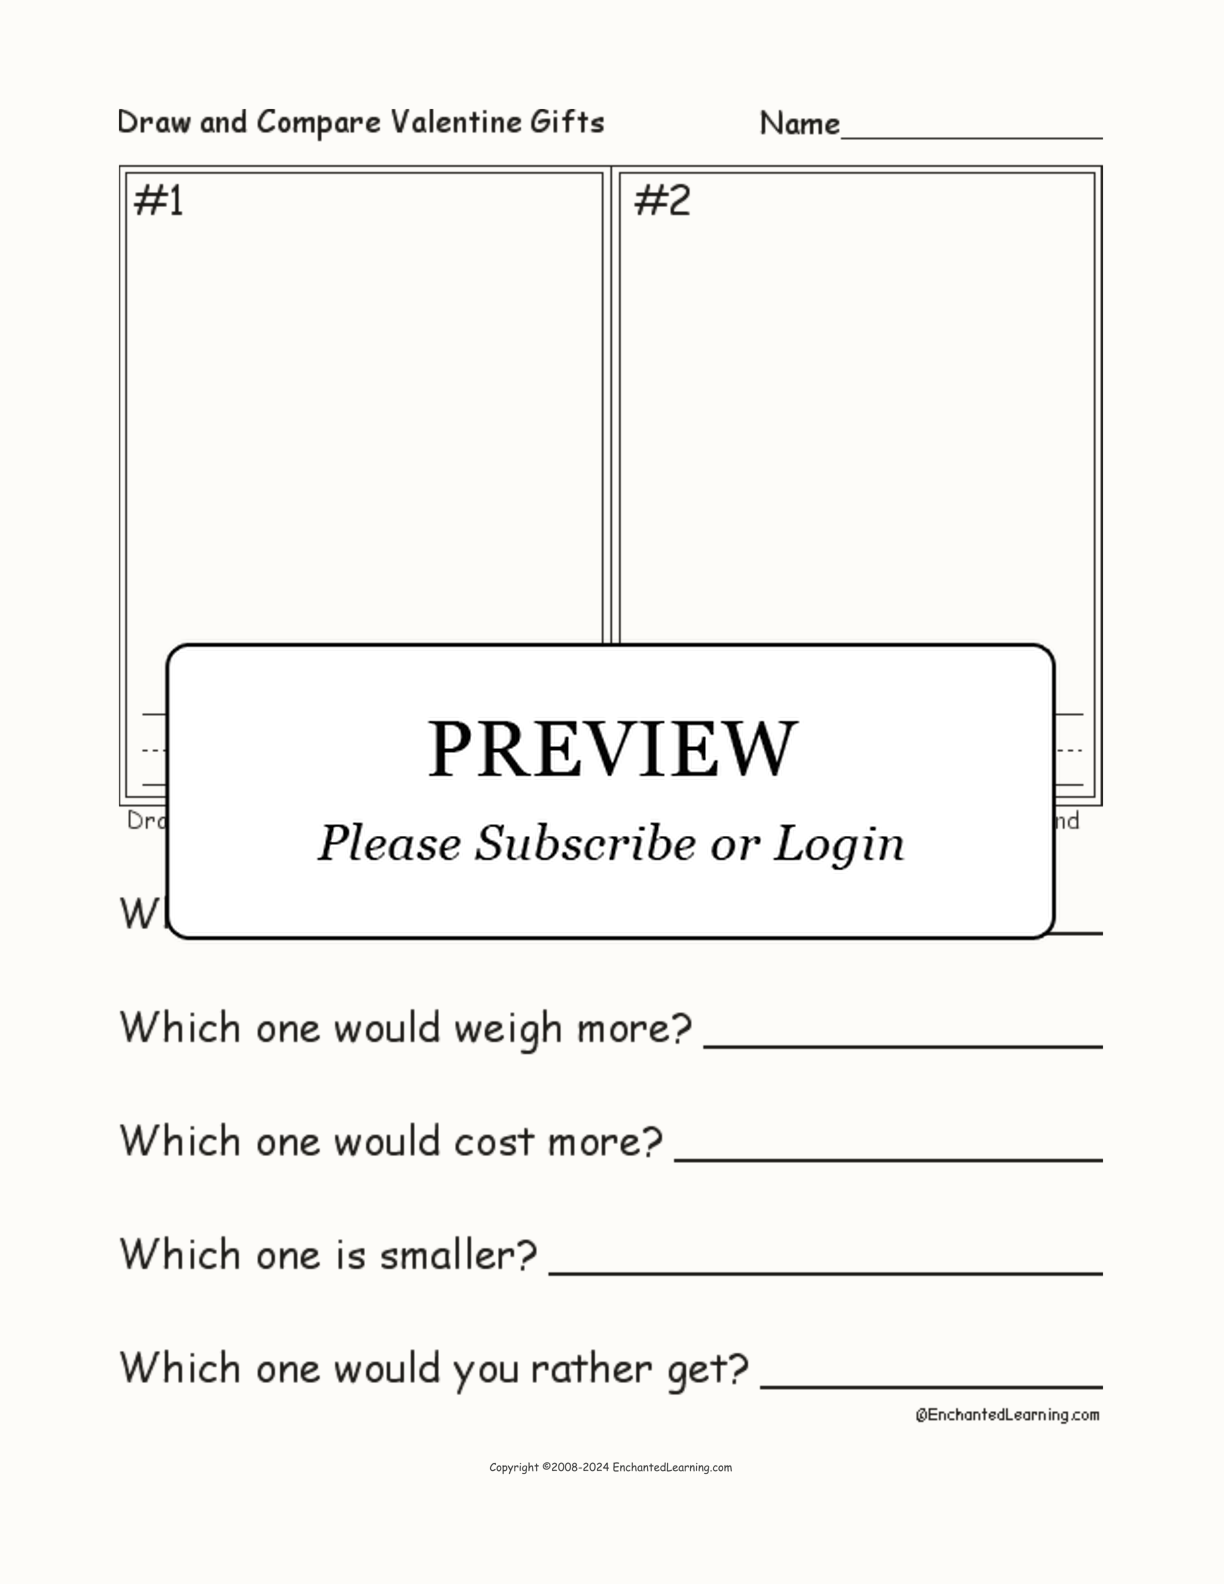 Draw and Compare Valentine's Day Gifts interactive printout page 1